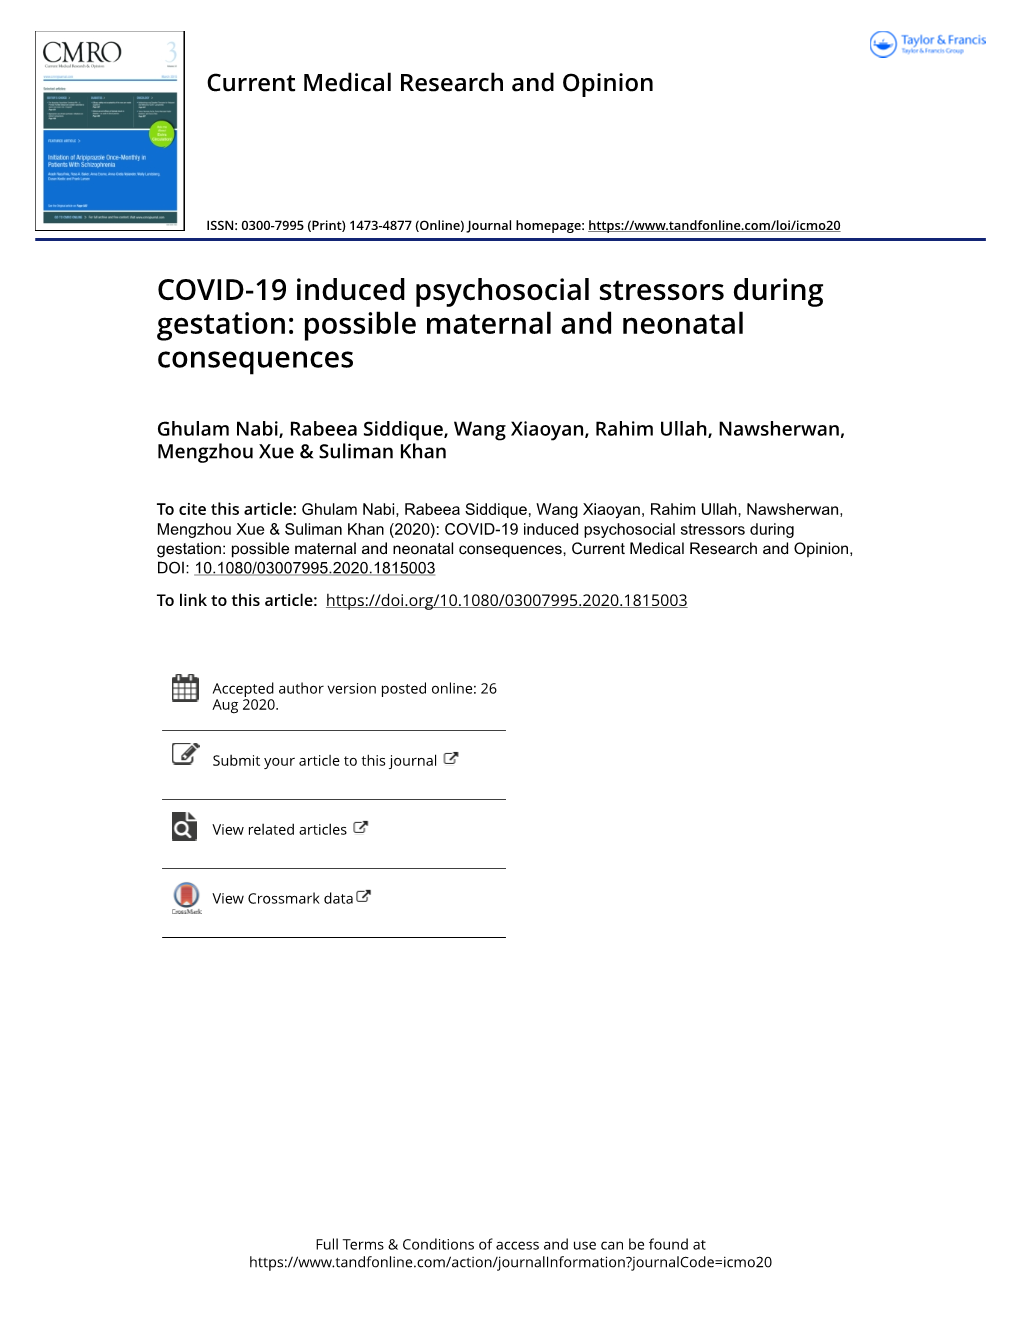 COVID-19 Induced Psychosocial Stressors During Gestation: Possible Maternal and Neonatal Consequences